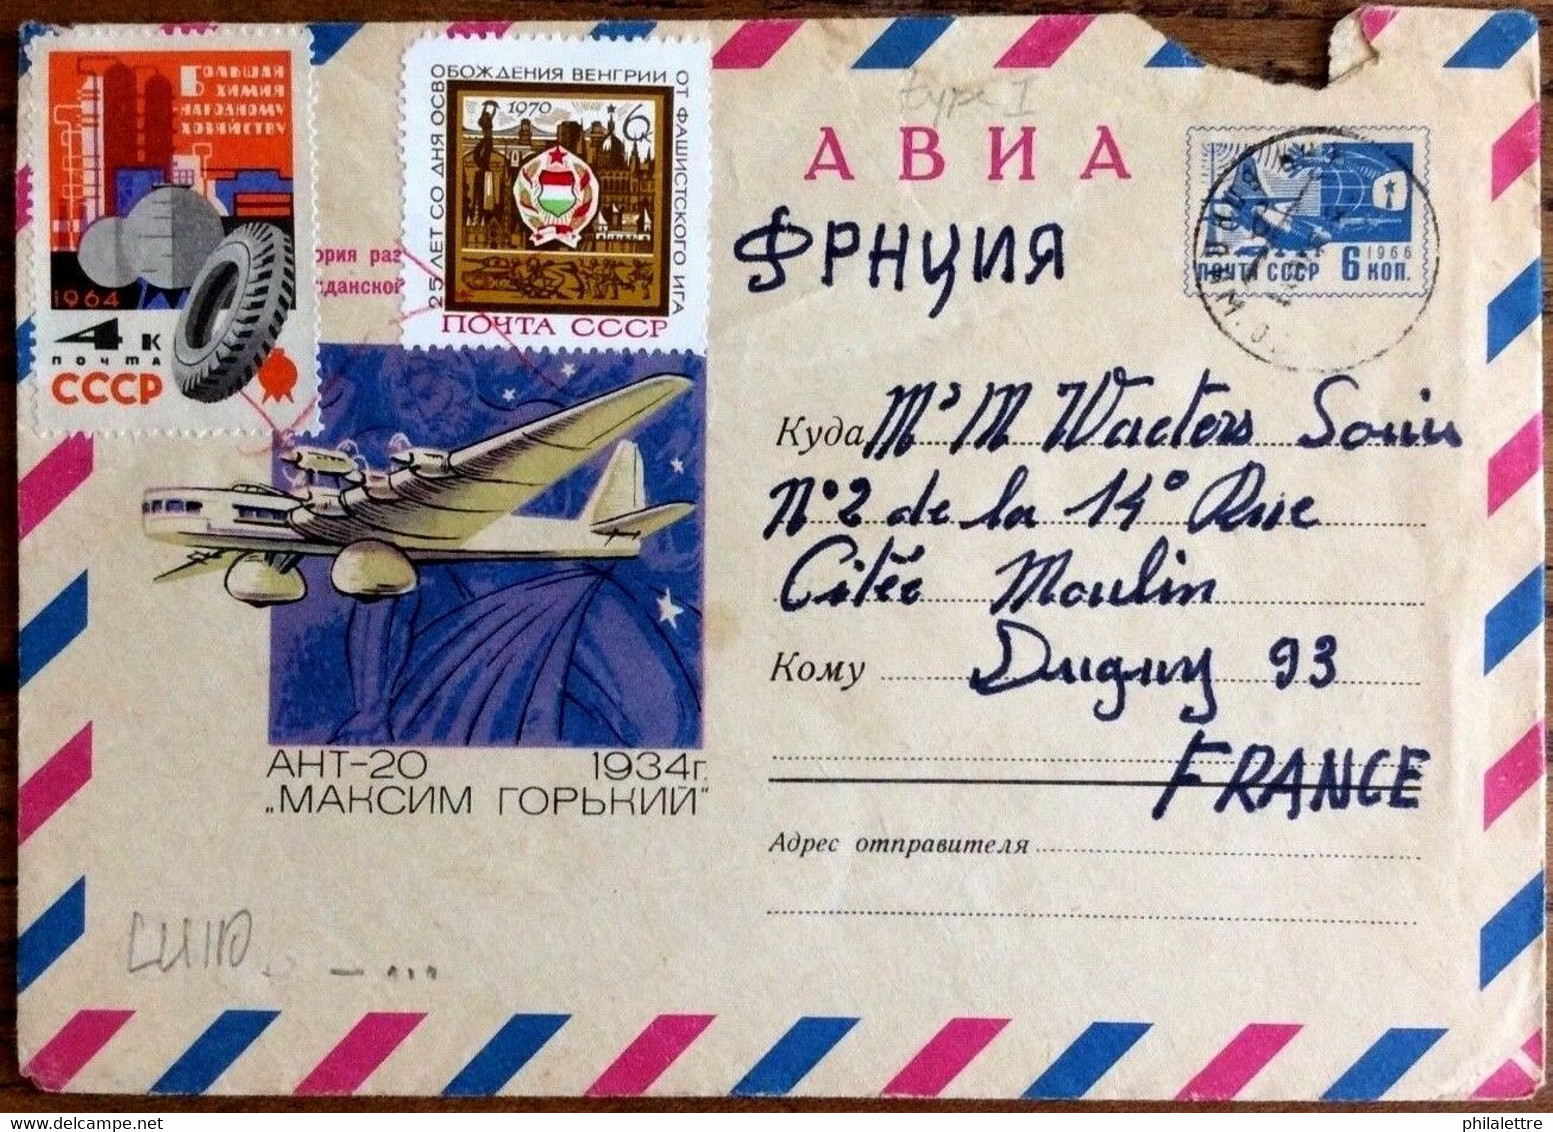 URSS Soviet Union - Mi.2873 & 3747 On Air Postal Cover MOSCOW To France - Covers & Documents